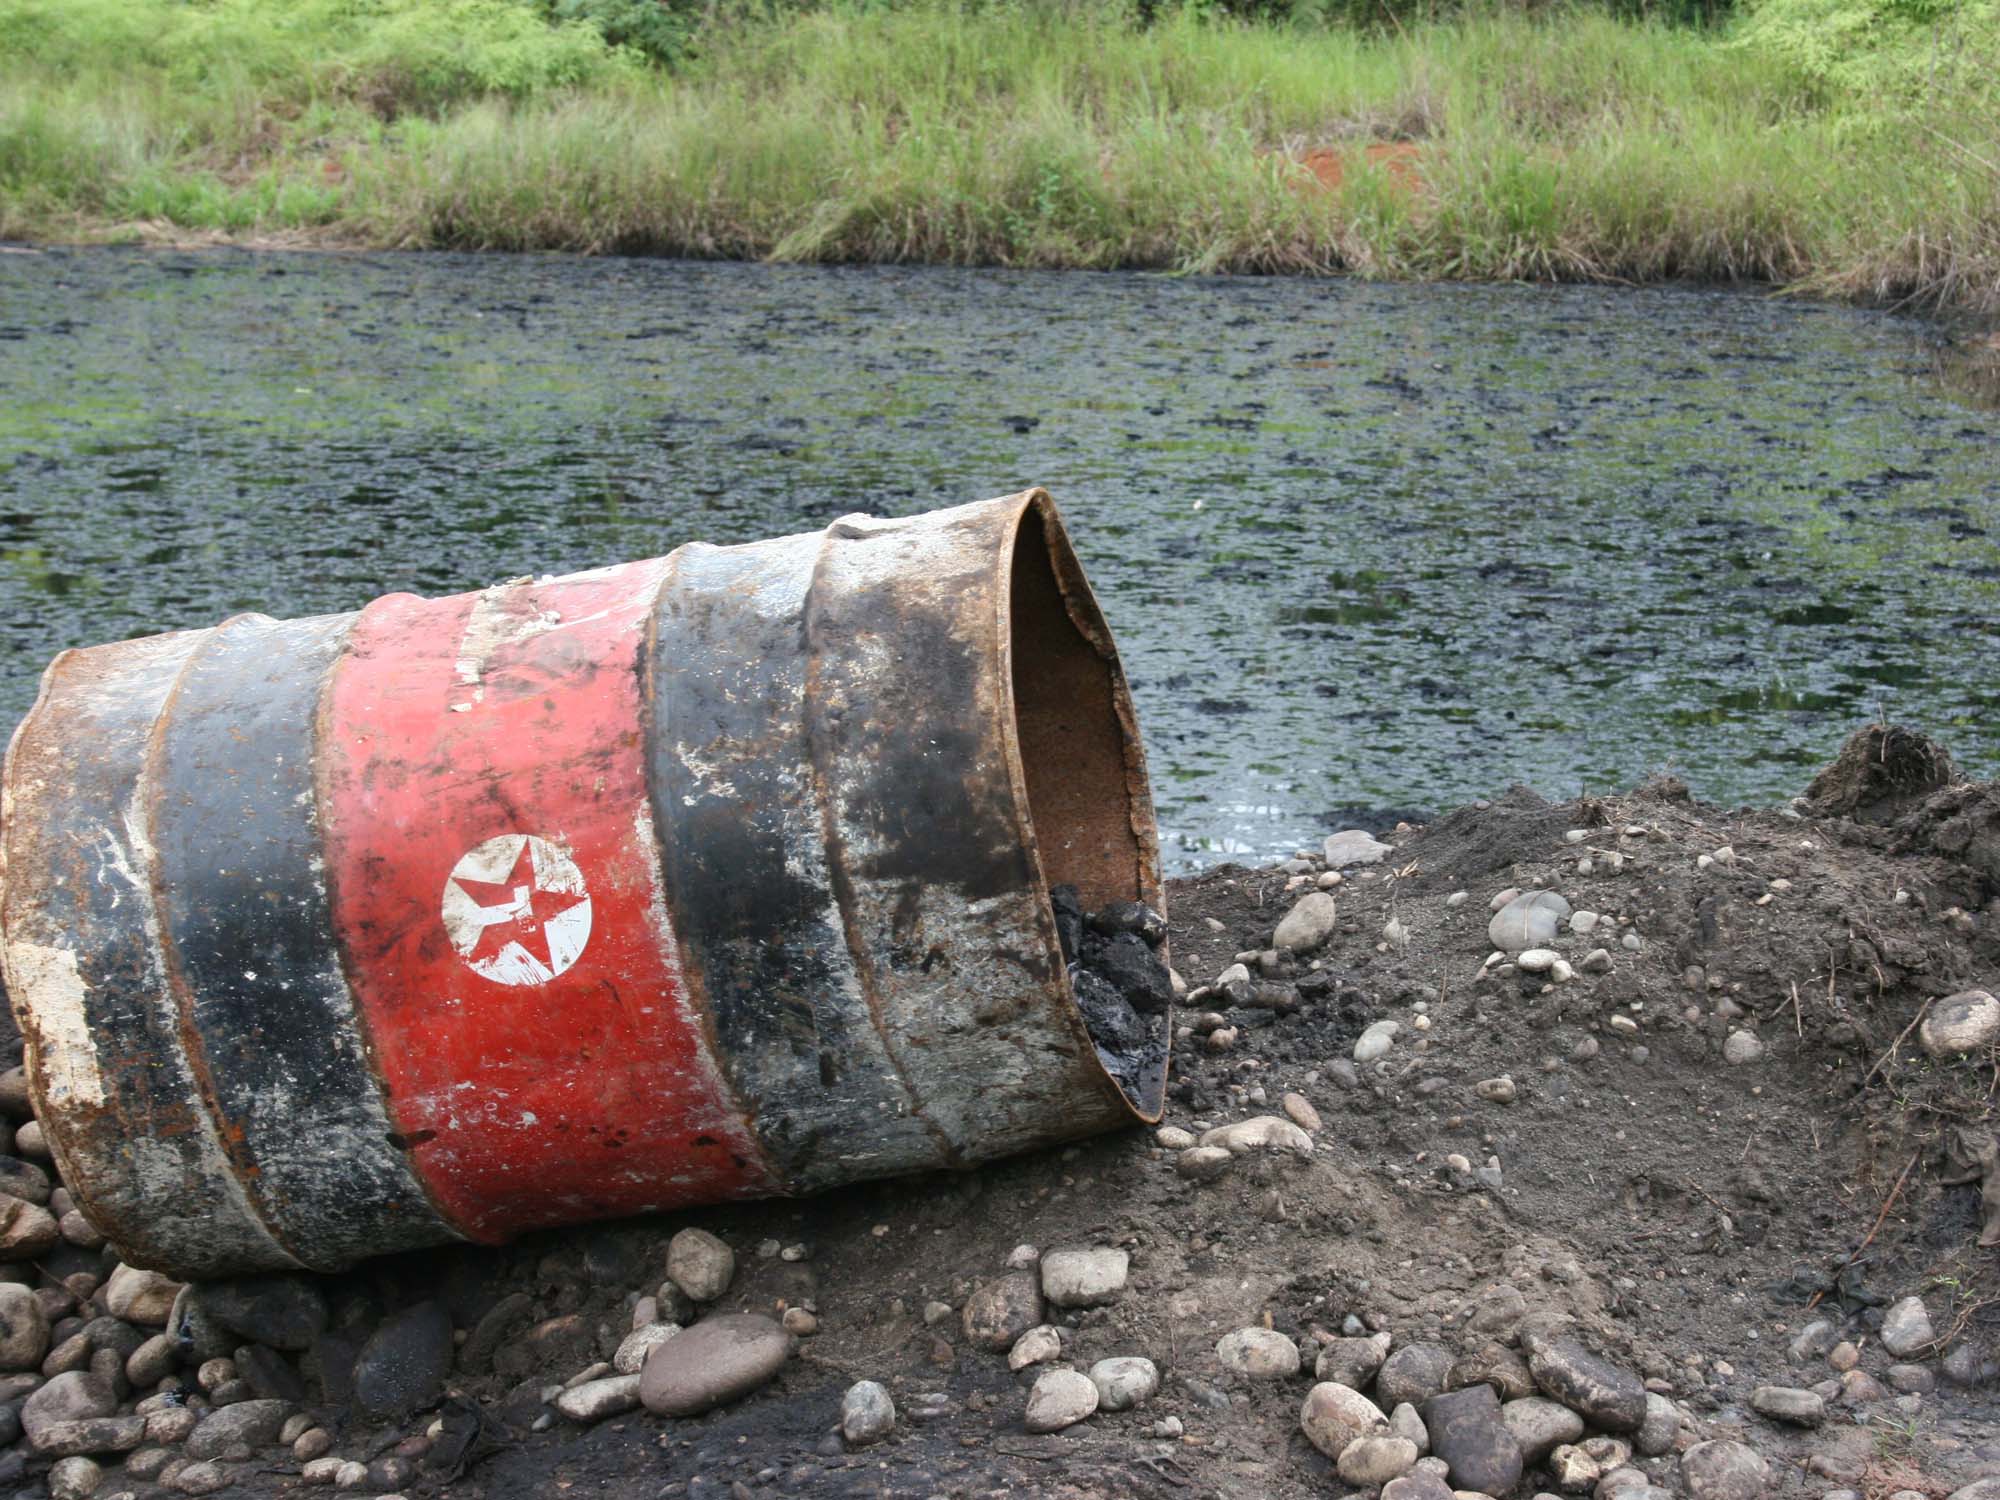 Rusty texaco oil drum next to a polluted river